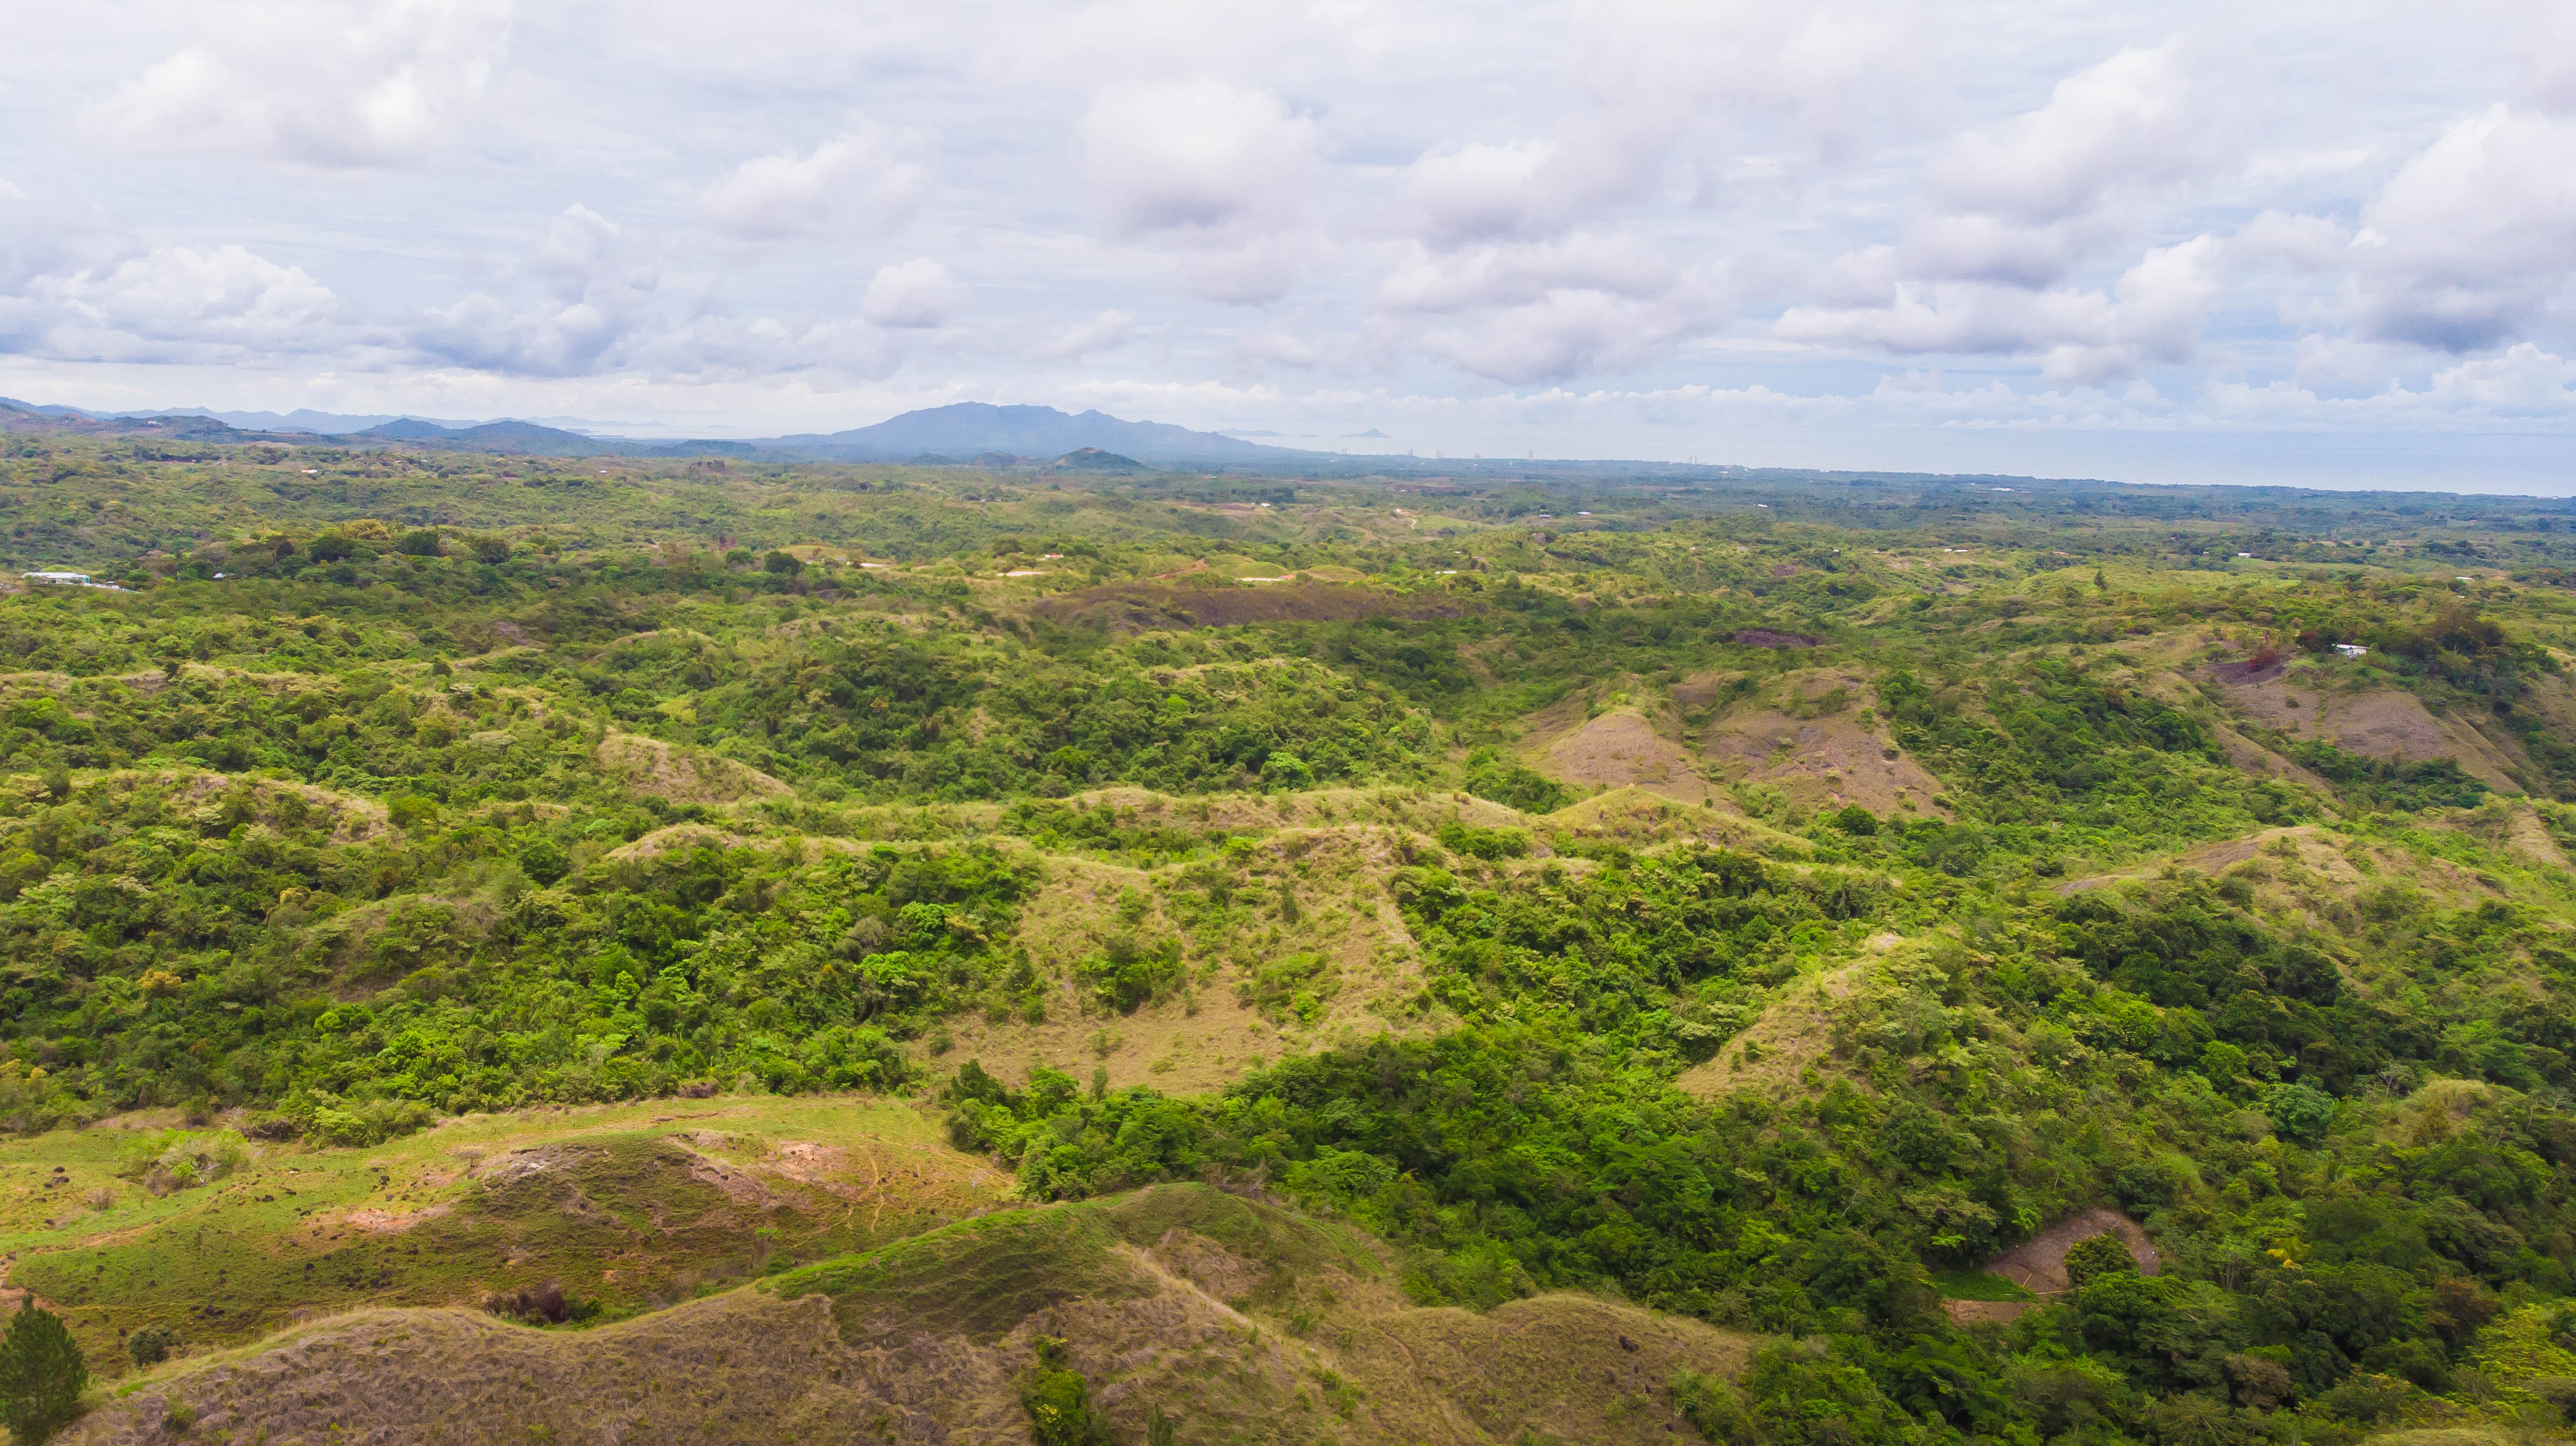 12-Hectare Land in San Carlos for $222,888 - PLS-19928 | Exclusive Panama Listings Beyond MLS